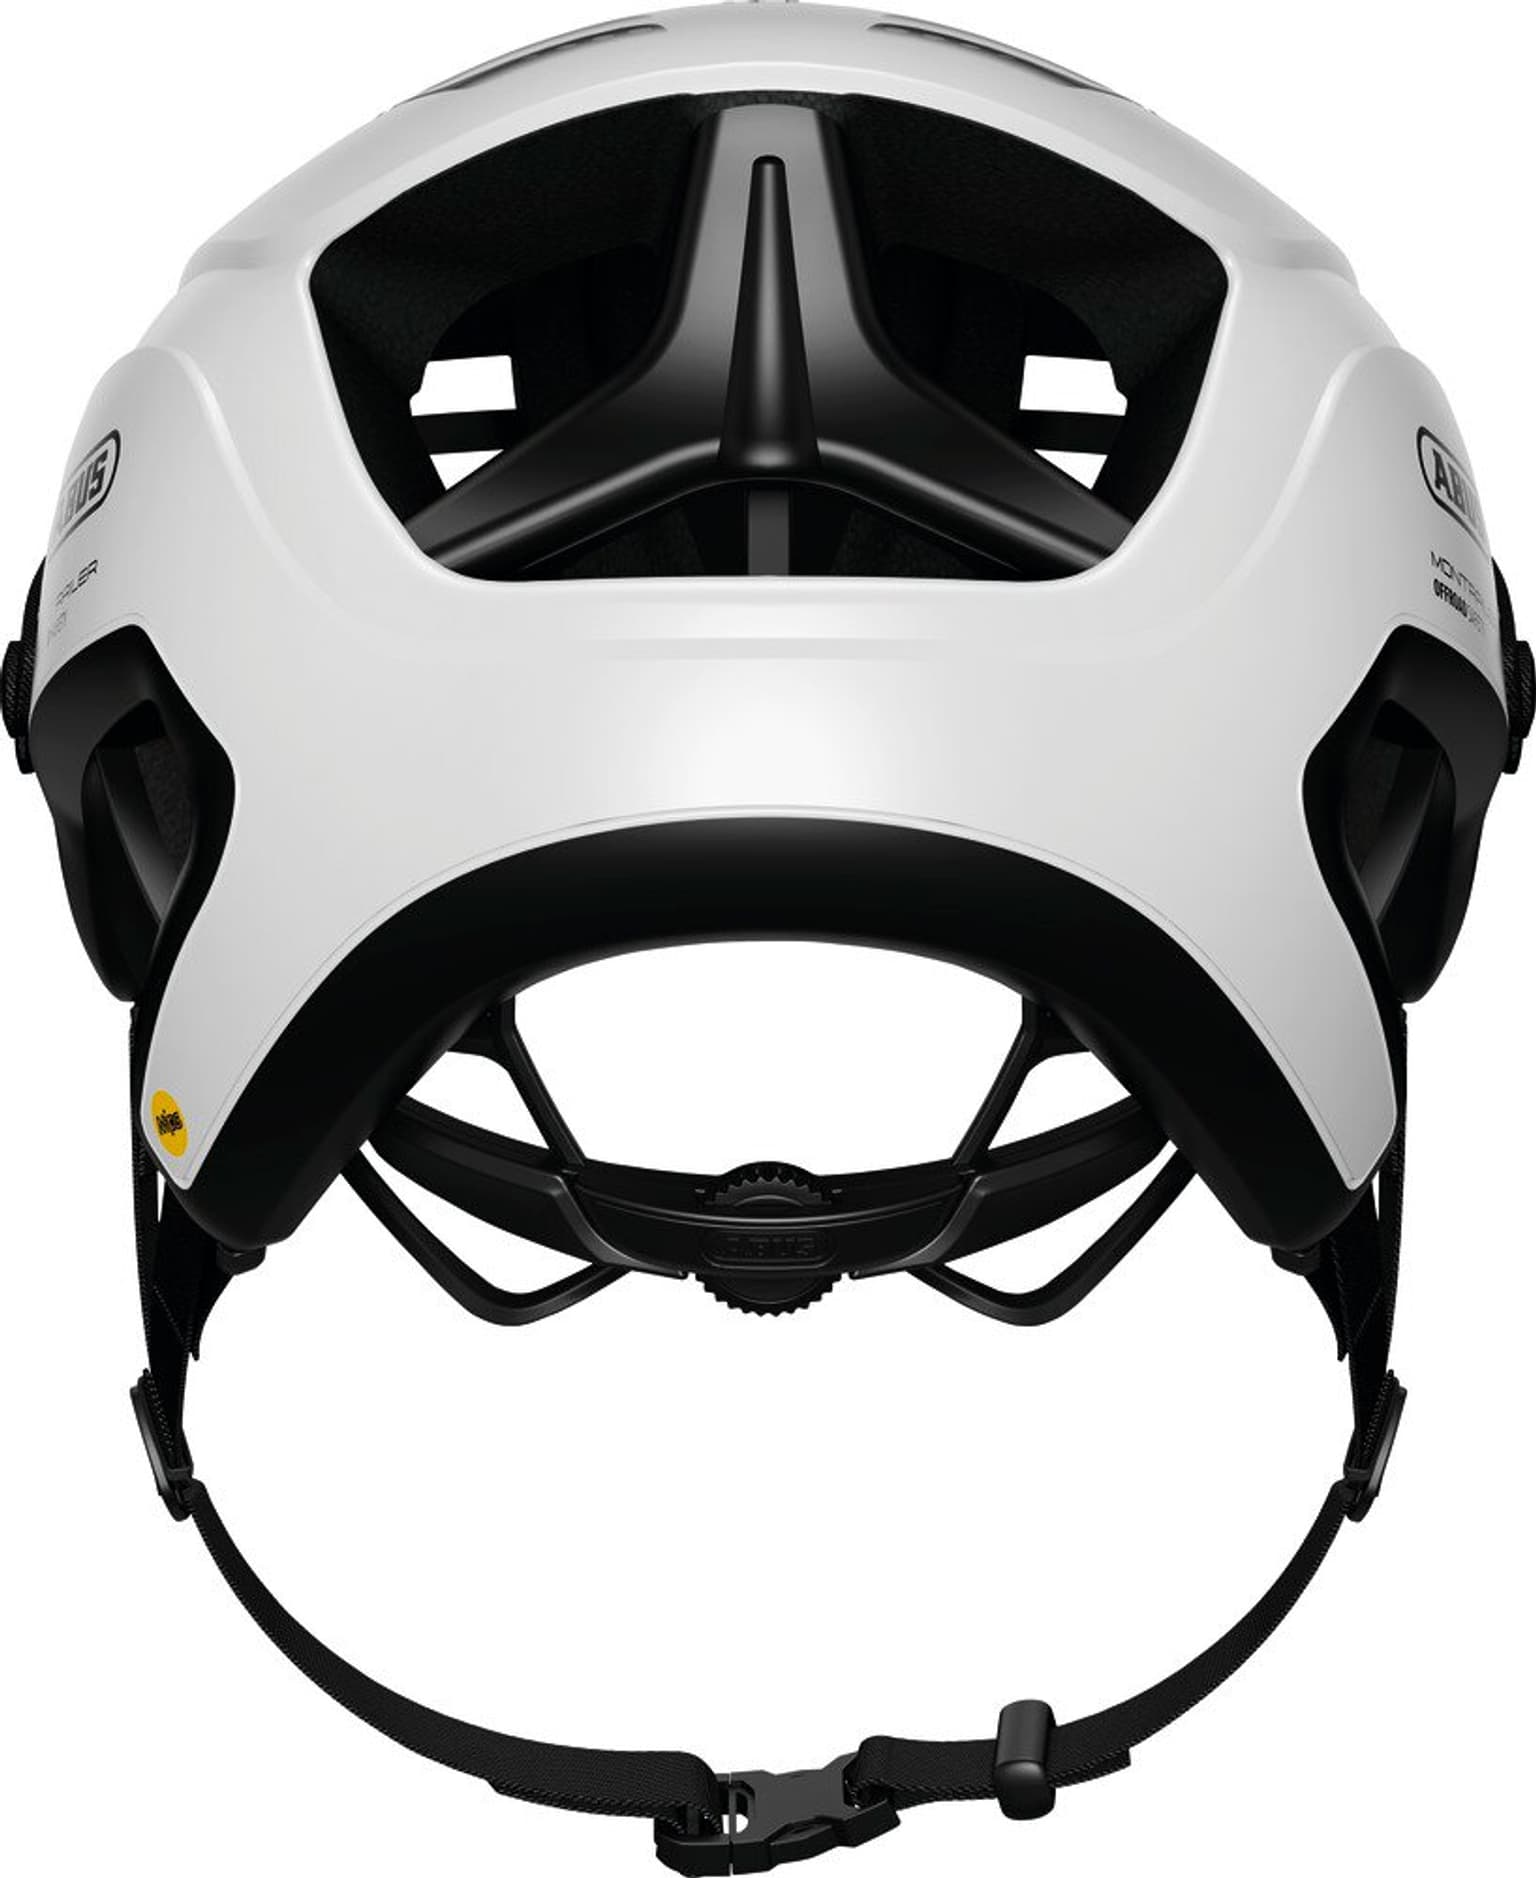 Abus Abus MonTrailer MIPS Velohelm weiss 3